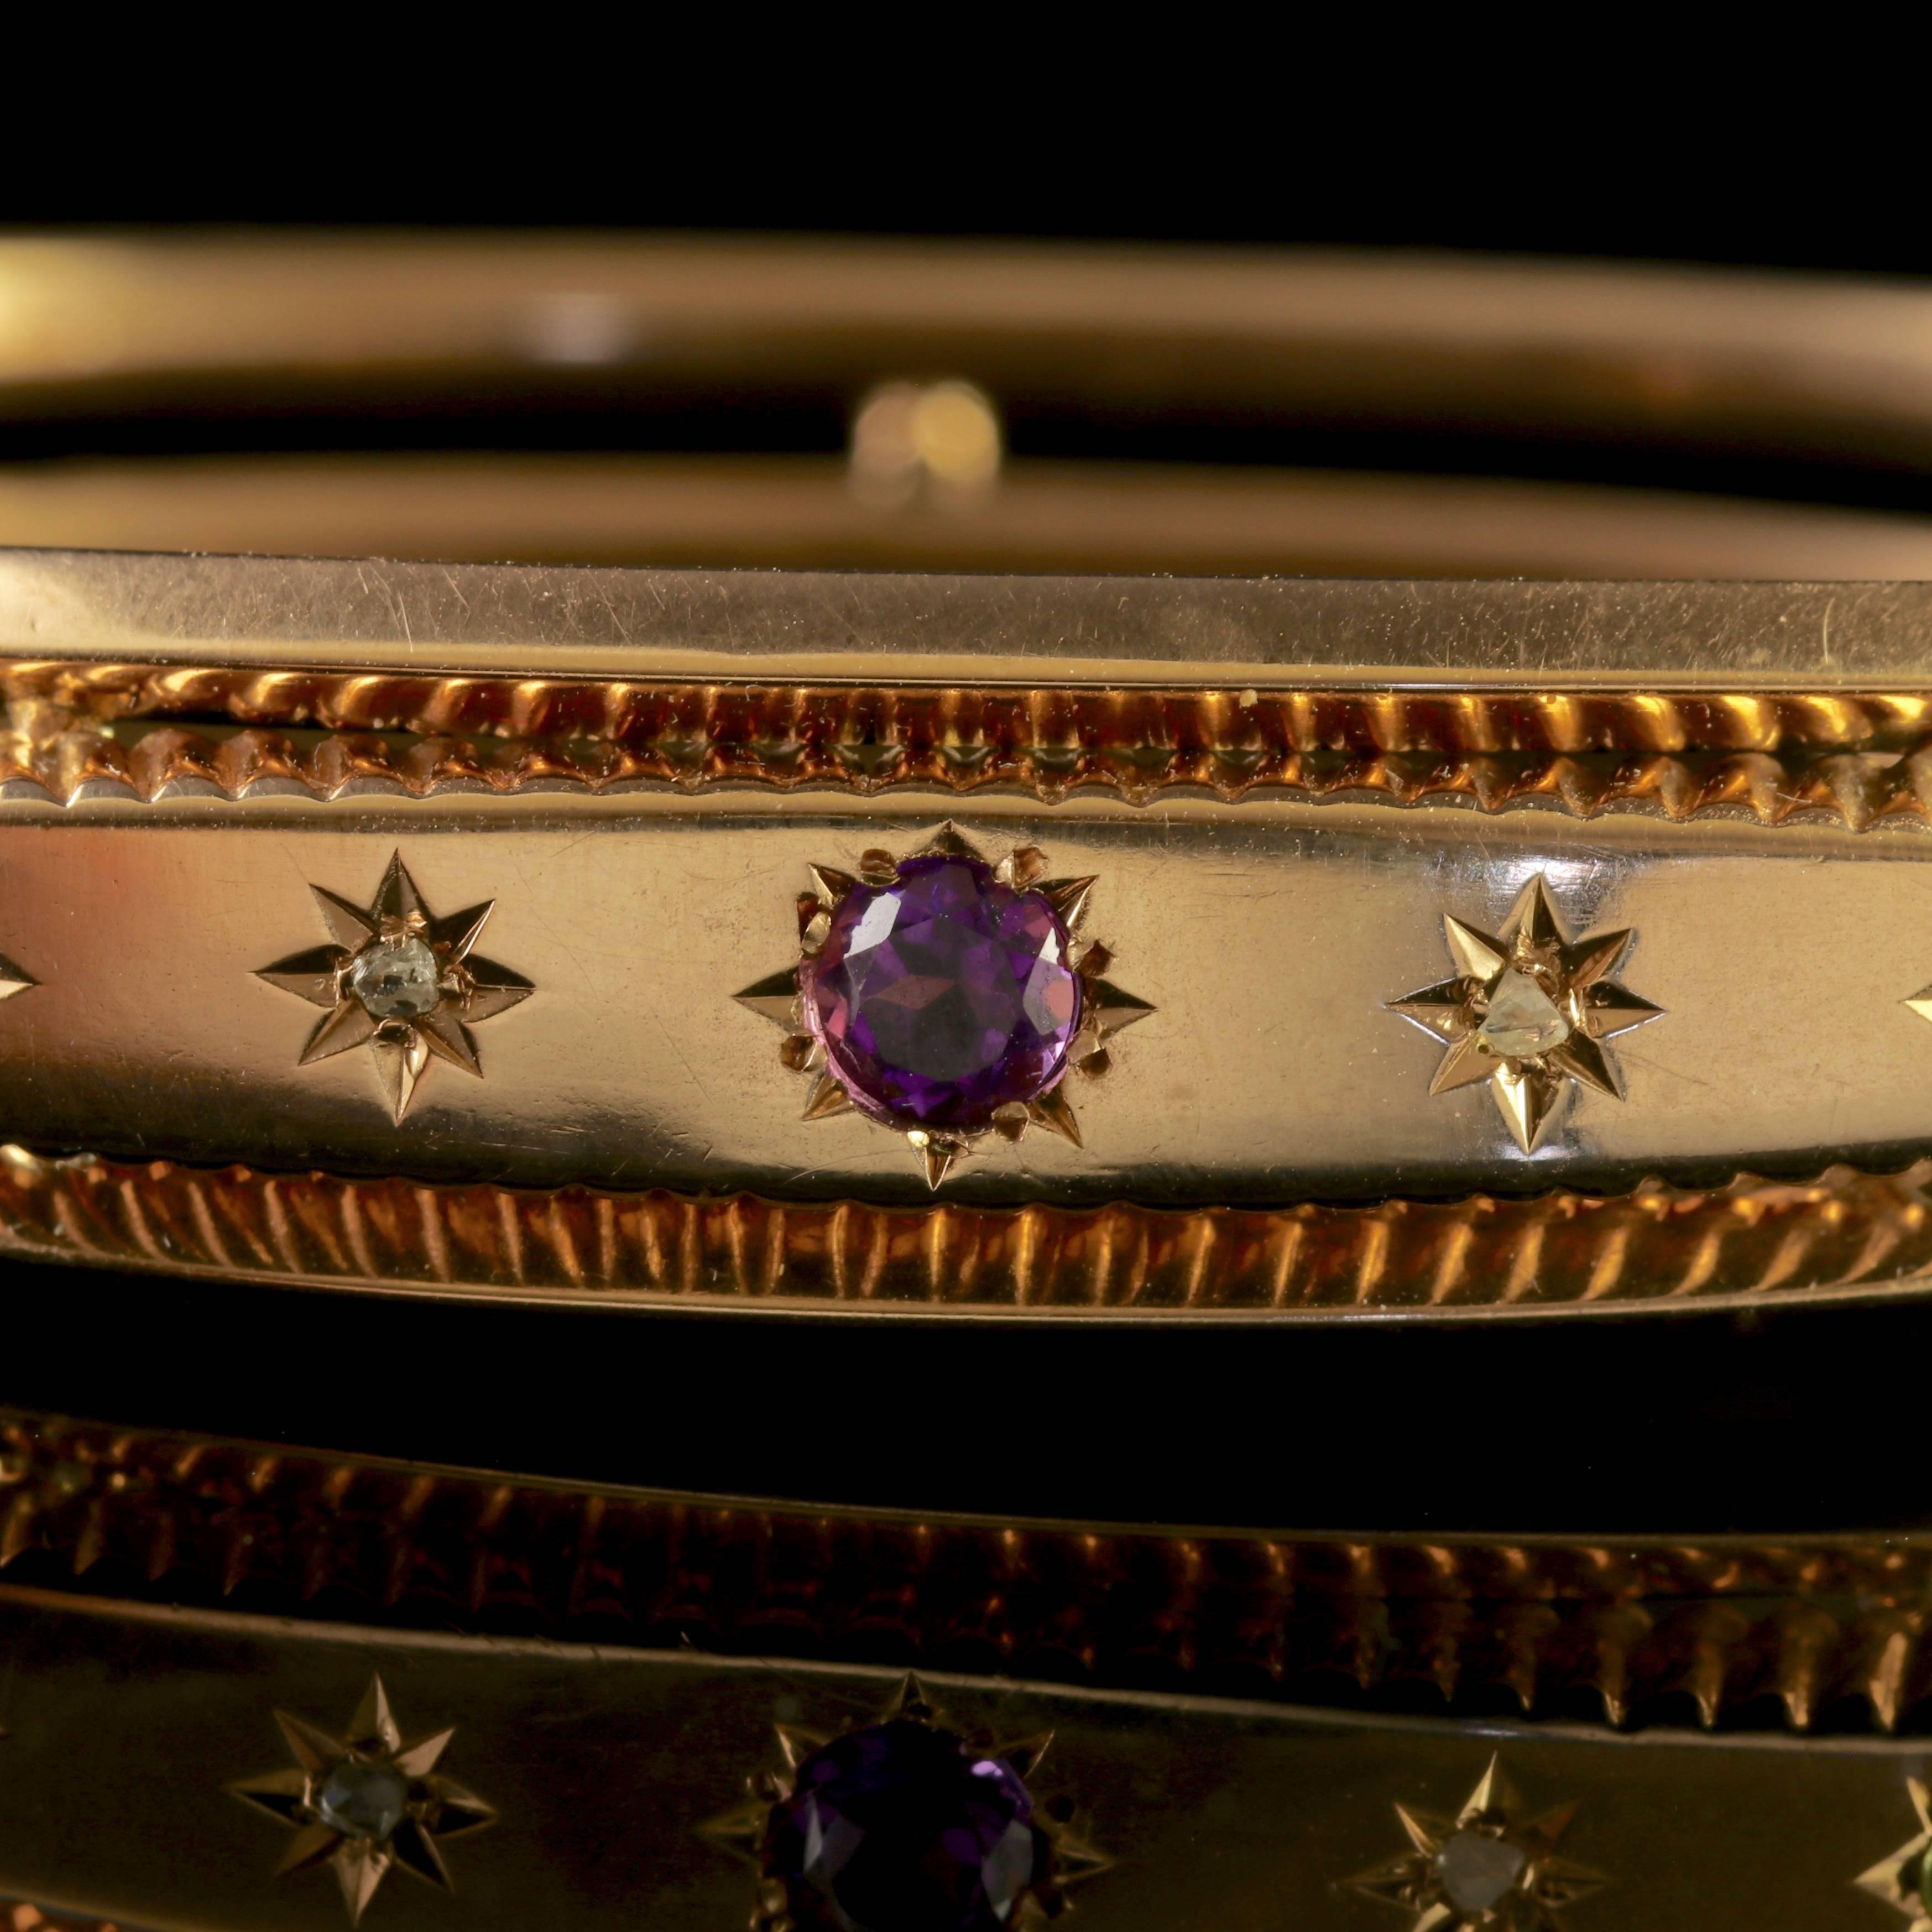 To read more please click continue reading below-

This fabulous antique 9ct Gold Victorian Suffragette Bangle is dated Chester 1904.

Emmeline Pankhurst was the leader of the British Suffragette movement in the 19th century and through her efforts